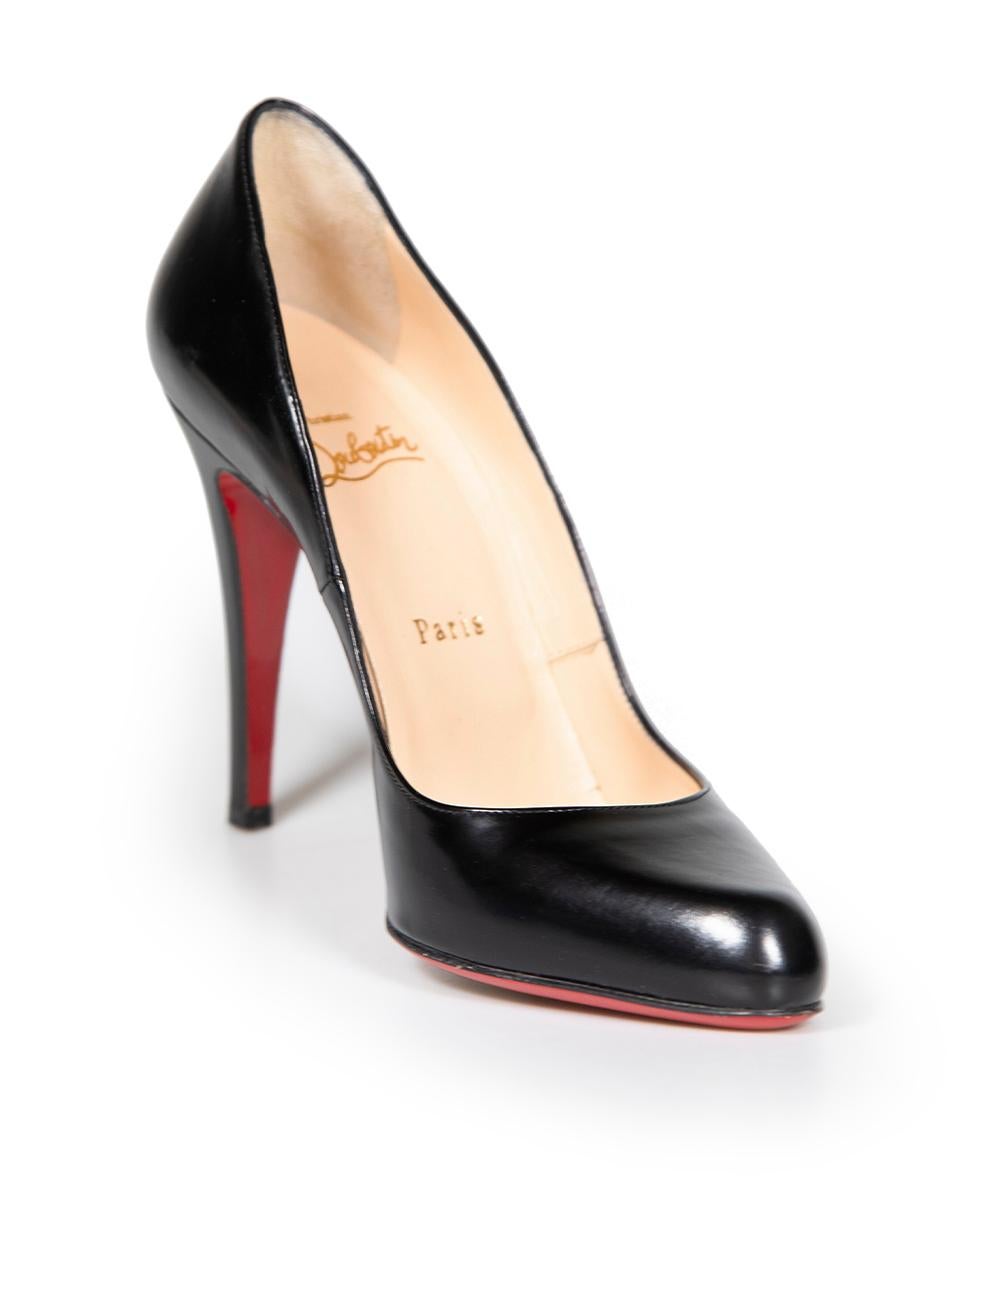 CONDITION is Good. Minor wear to heels is evident. Light wear to the uppers with a couple of small scratches found on the quarters and heels. There is noticeable abrasion through the outsoles on this used Christian Louboutin designer resale item.
 
